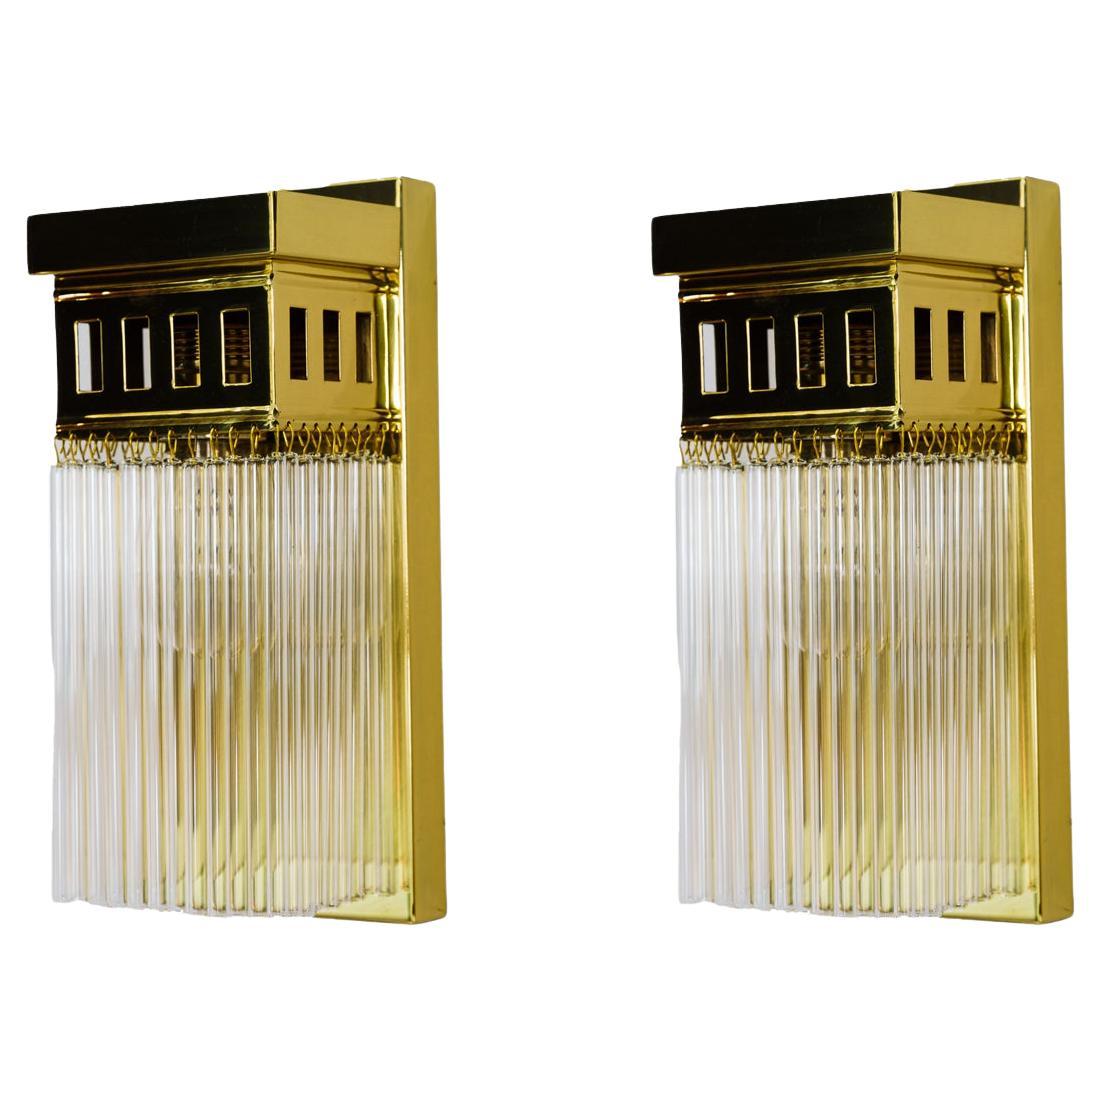 Reproduction of a art deco wall lamp with glass sticks